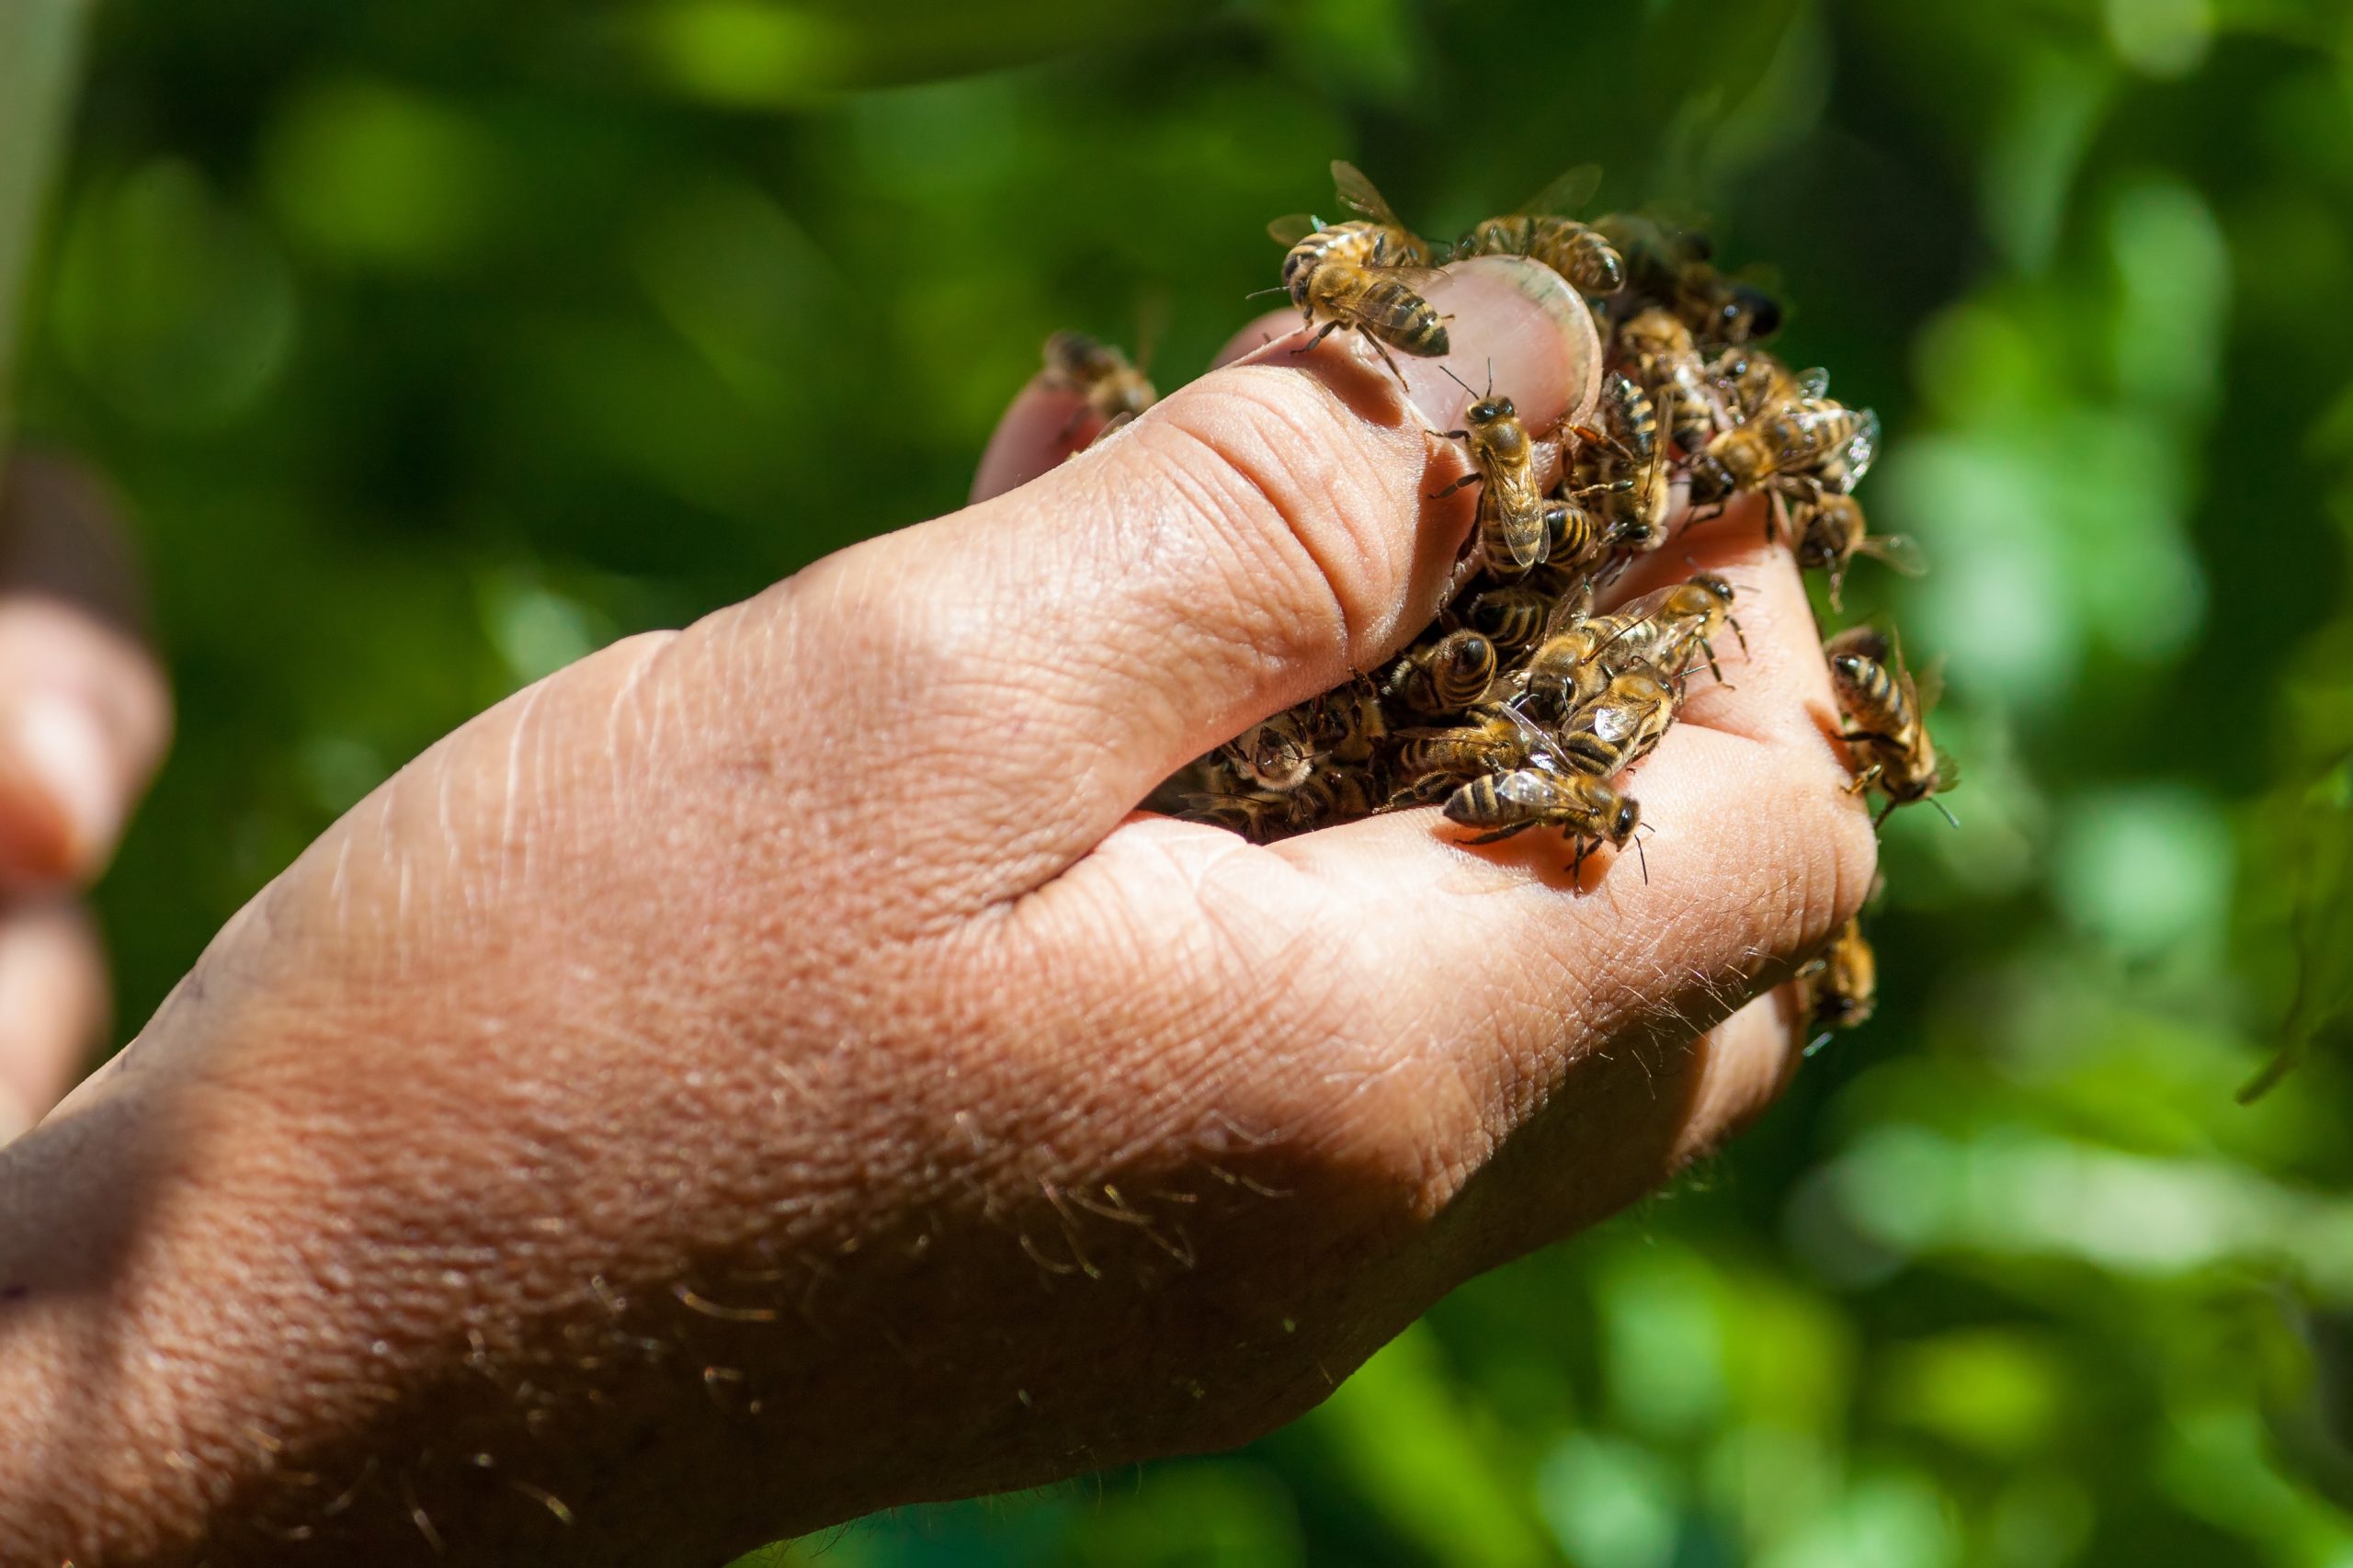 Honeybees and How to Help Them